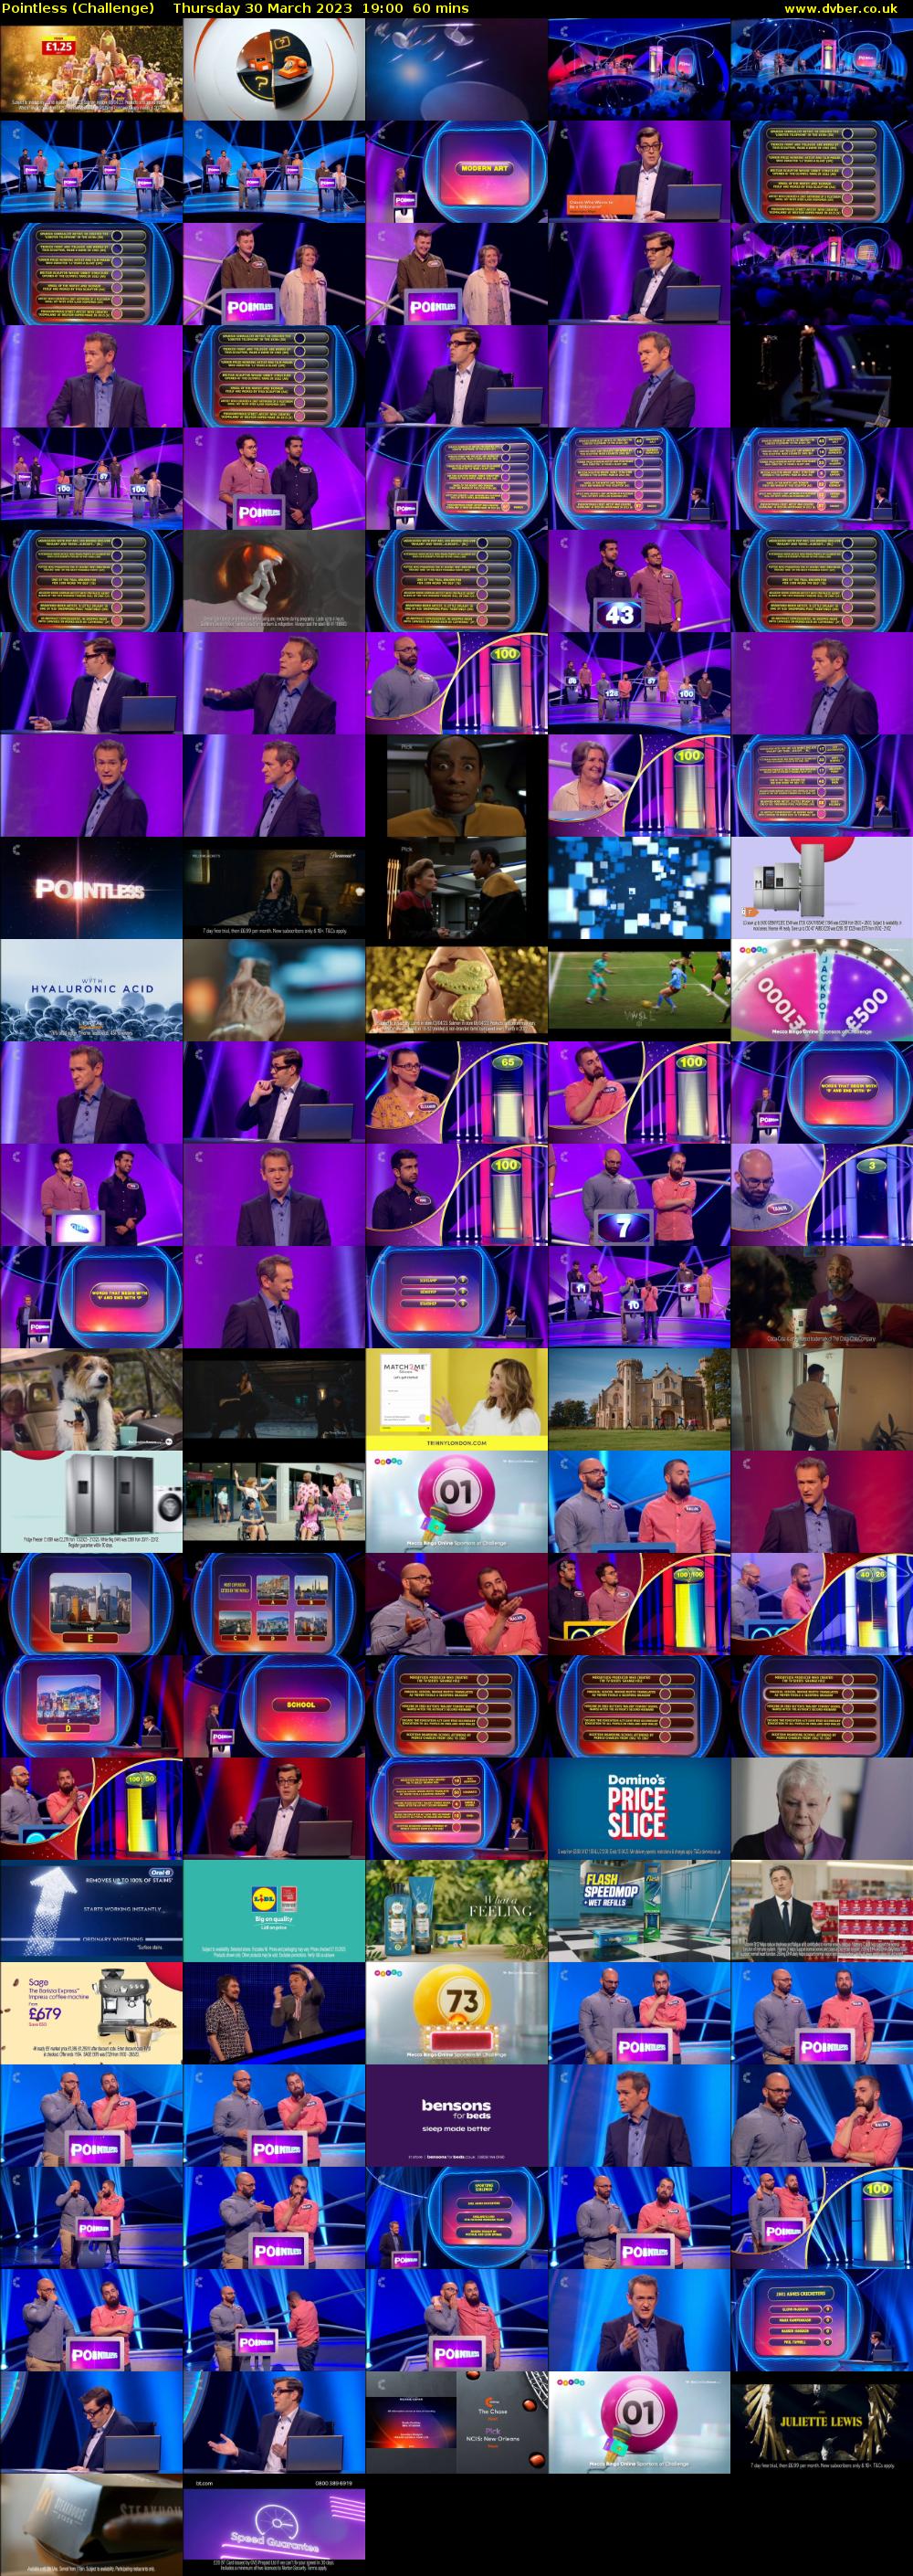 Pointless (Challenge) Thursday 30 March 2023 19:00 - 20:00